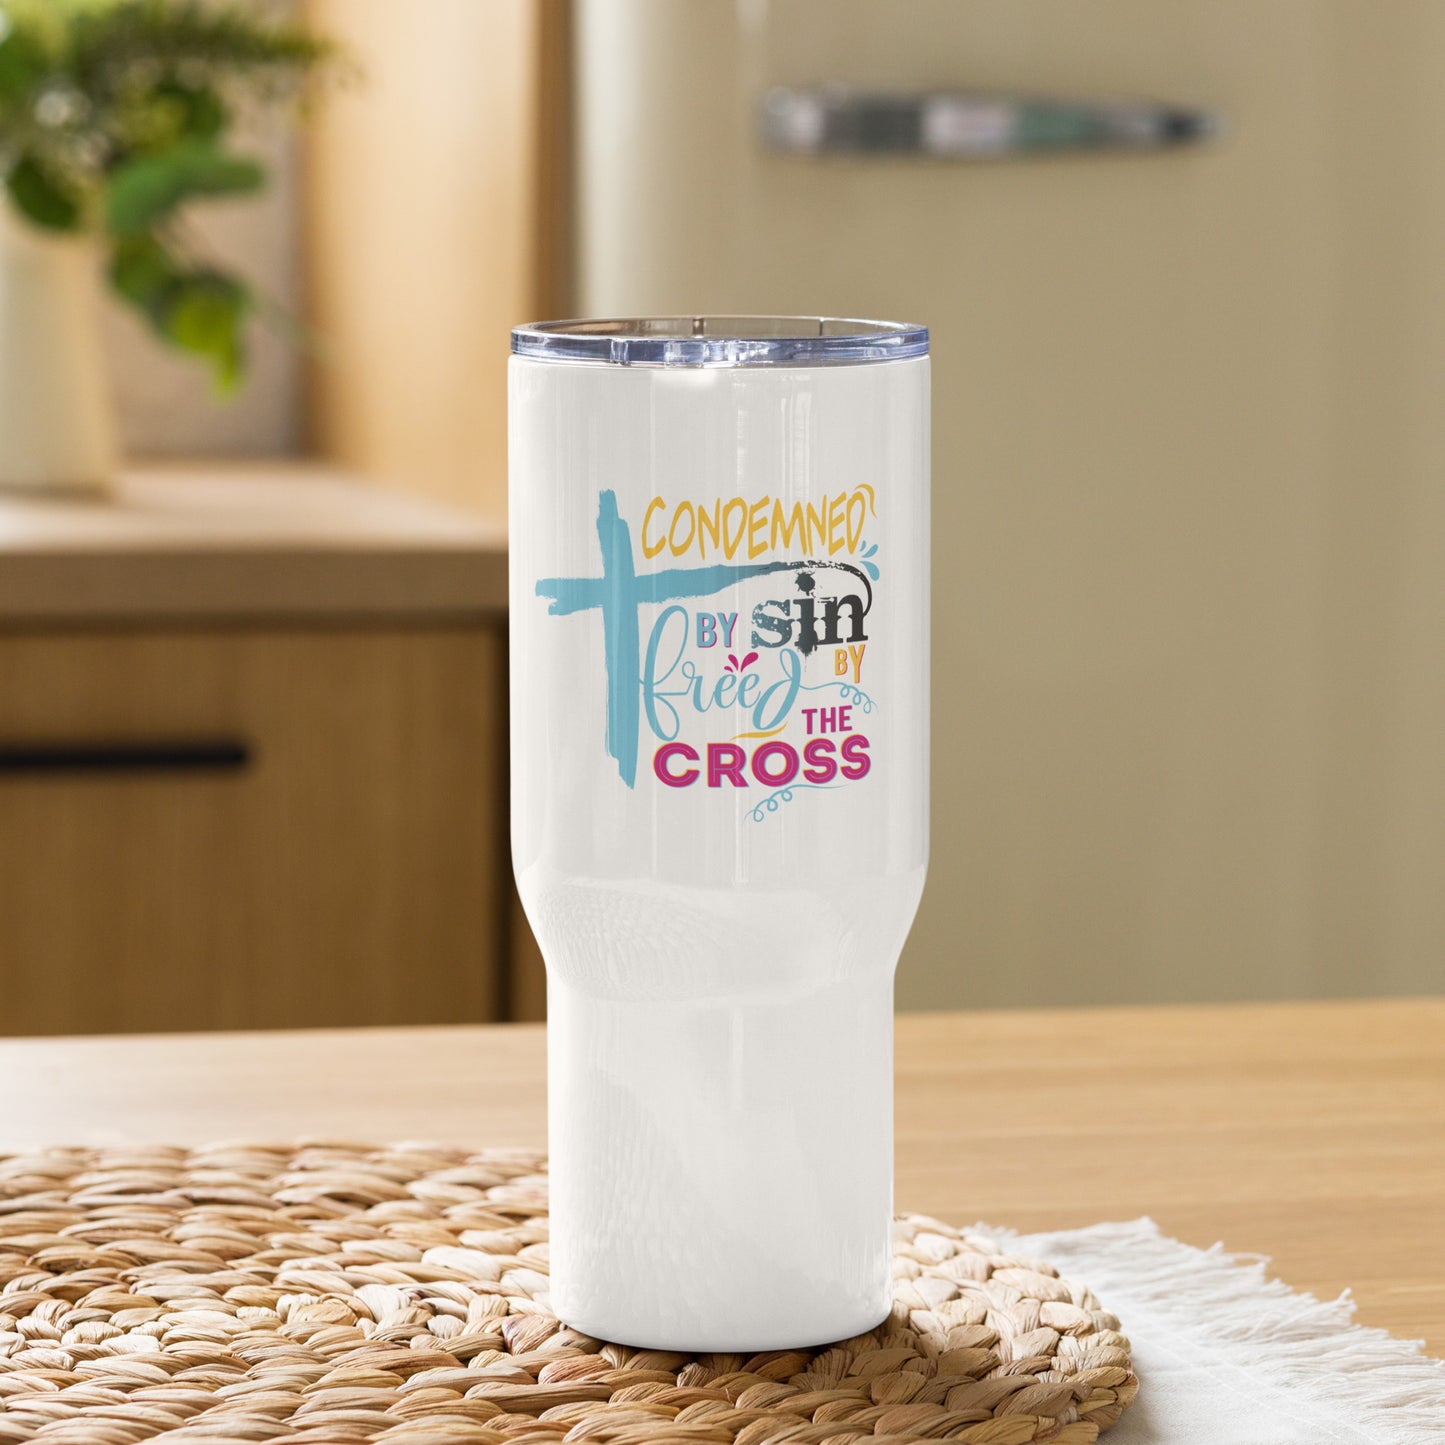 Condemned By Sin Freed By The Cross Christian Travel mug with a handle